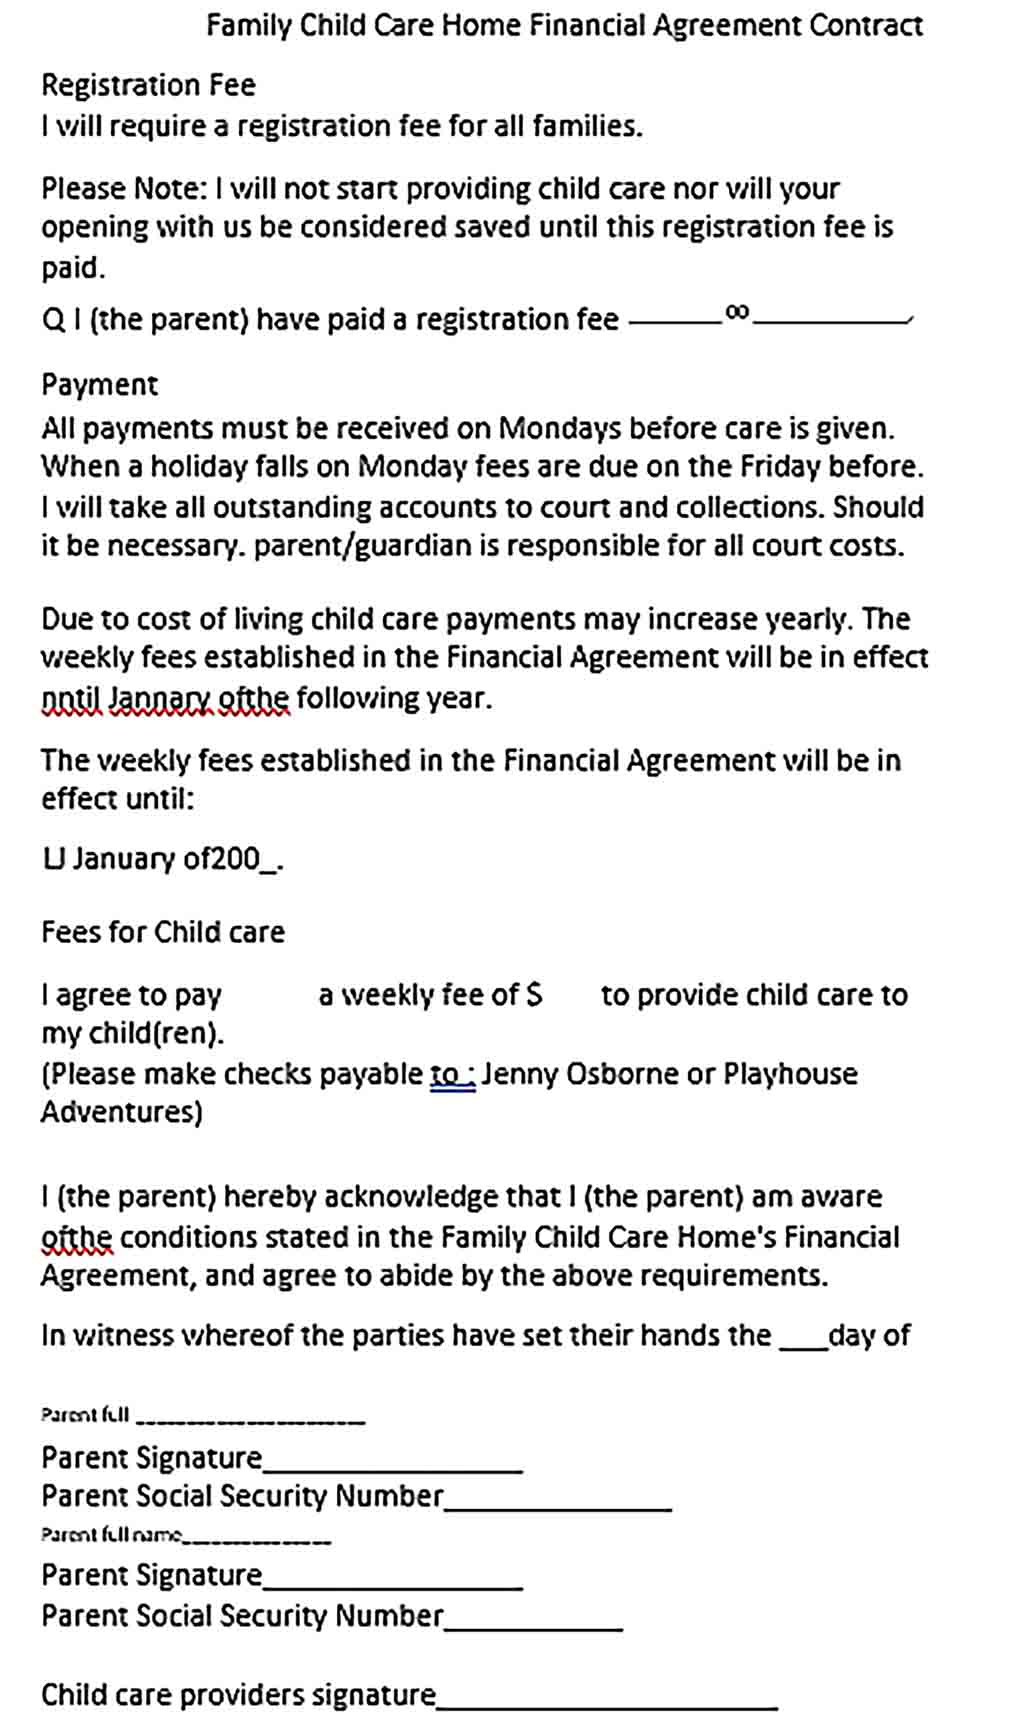 Sample Child Care Financial Agreement